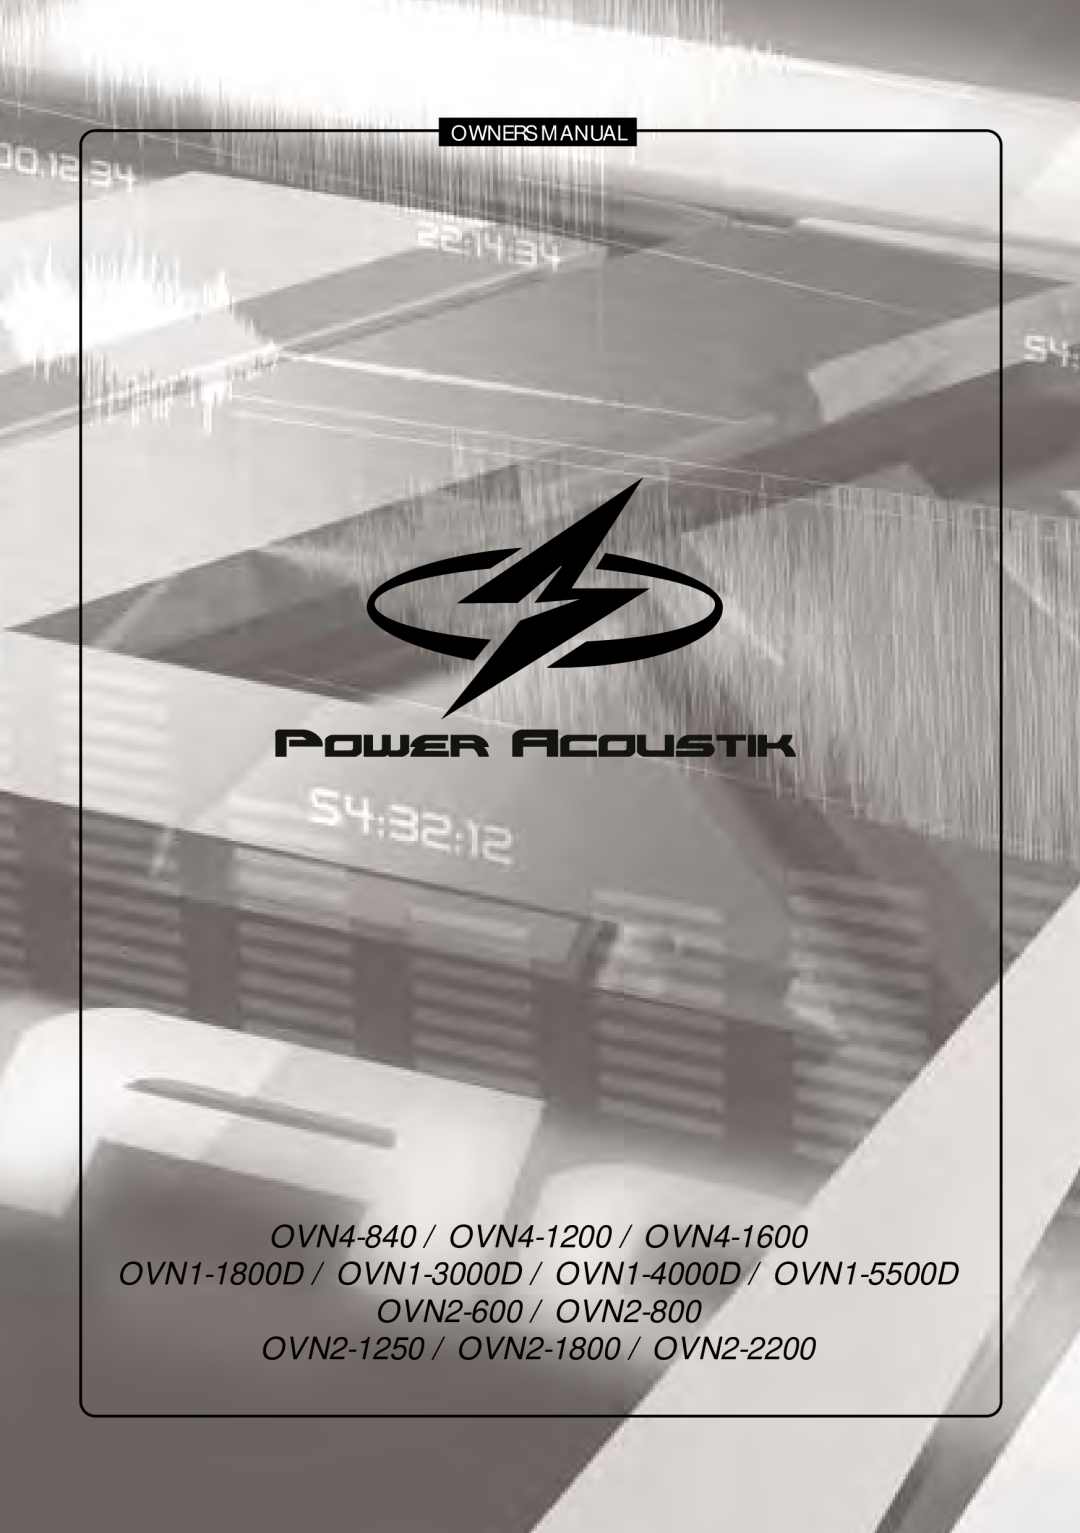 Power Acoustik owner manual OVN4-840 / OVN4-1200 / OVN4-1600, OVN2-1250 / OVN2-1800 / OVN2-2200, Owners Manual 